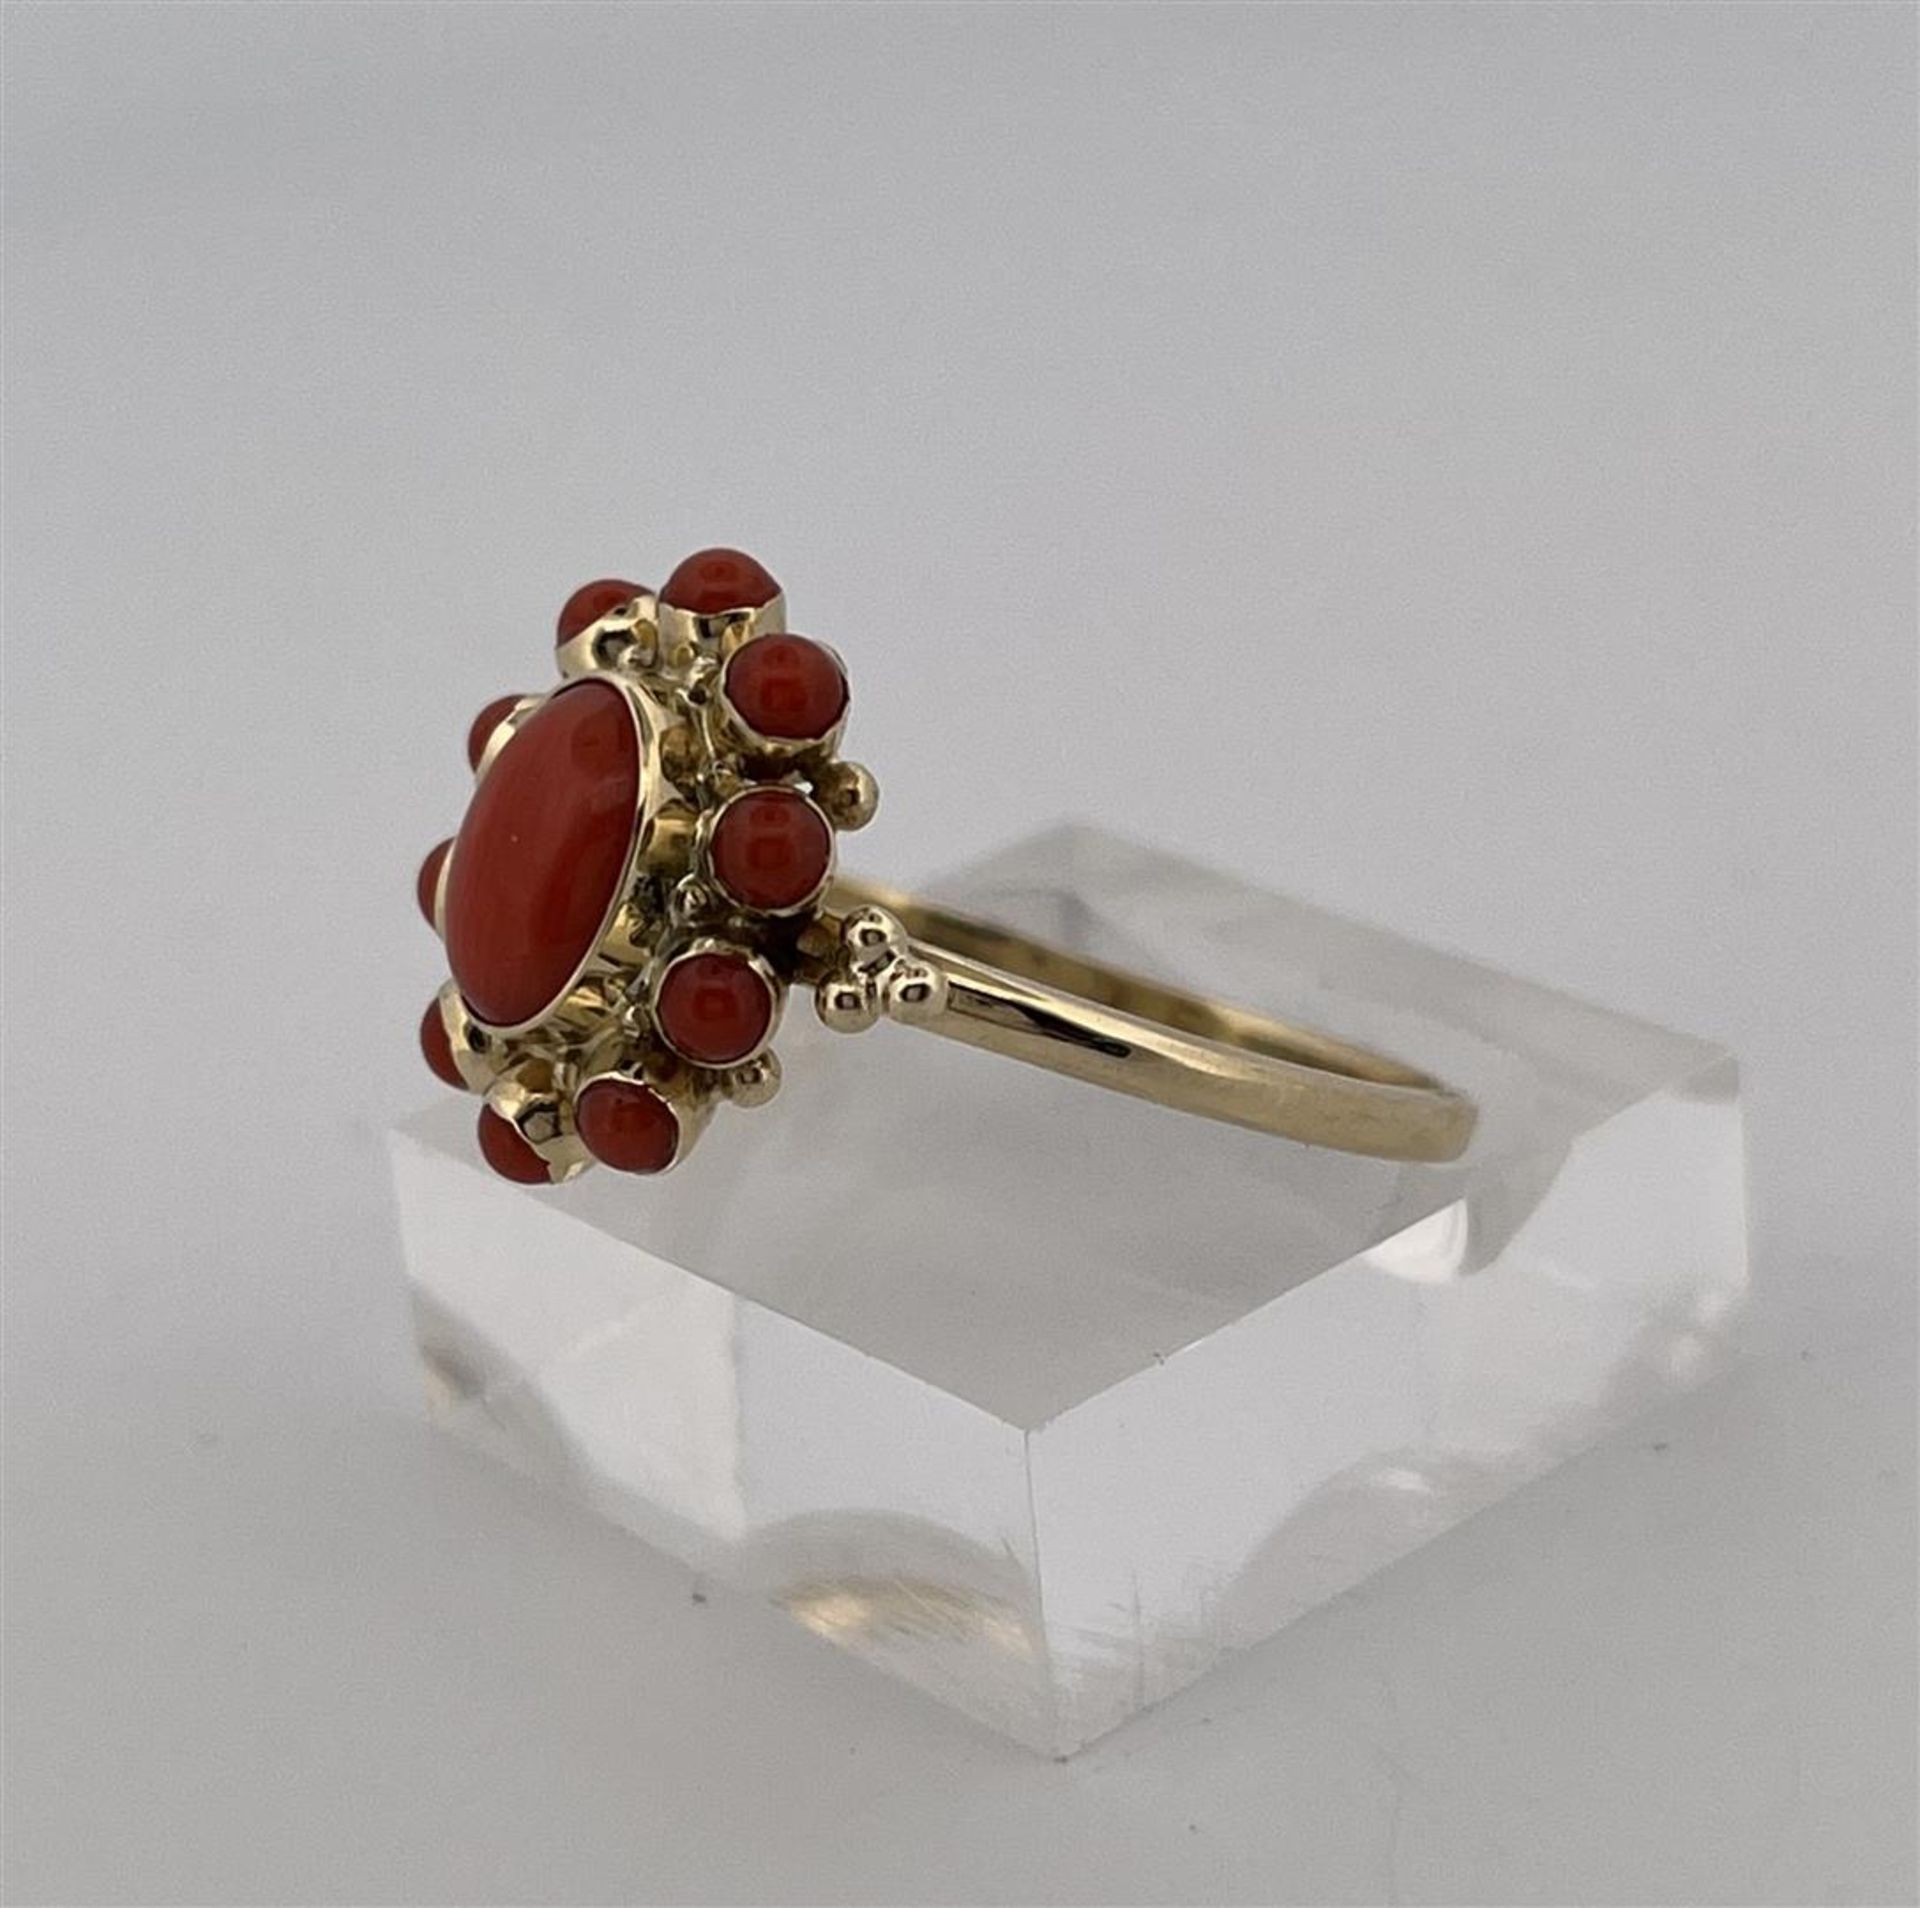 14kt yellow gold rosette ring set with red coral.
The ring is set with 1 central oval cabochon cut r - Image 3 of 7